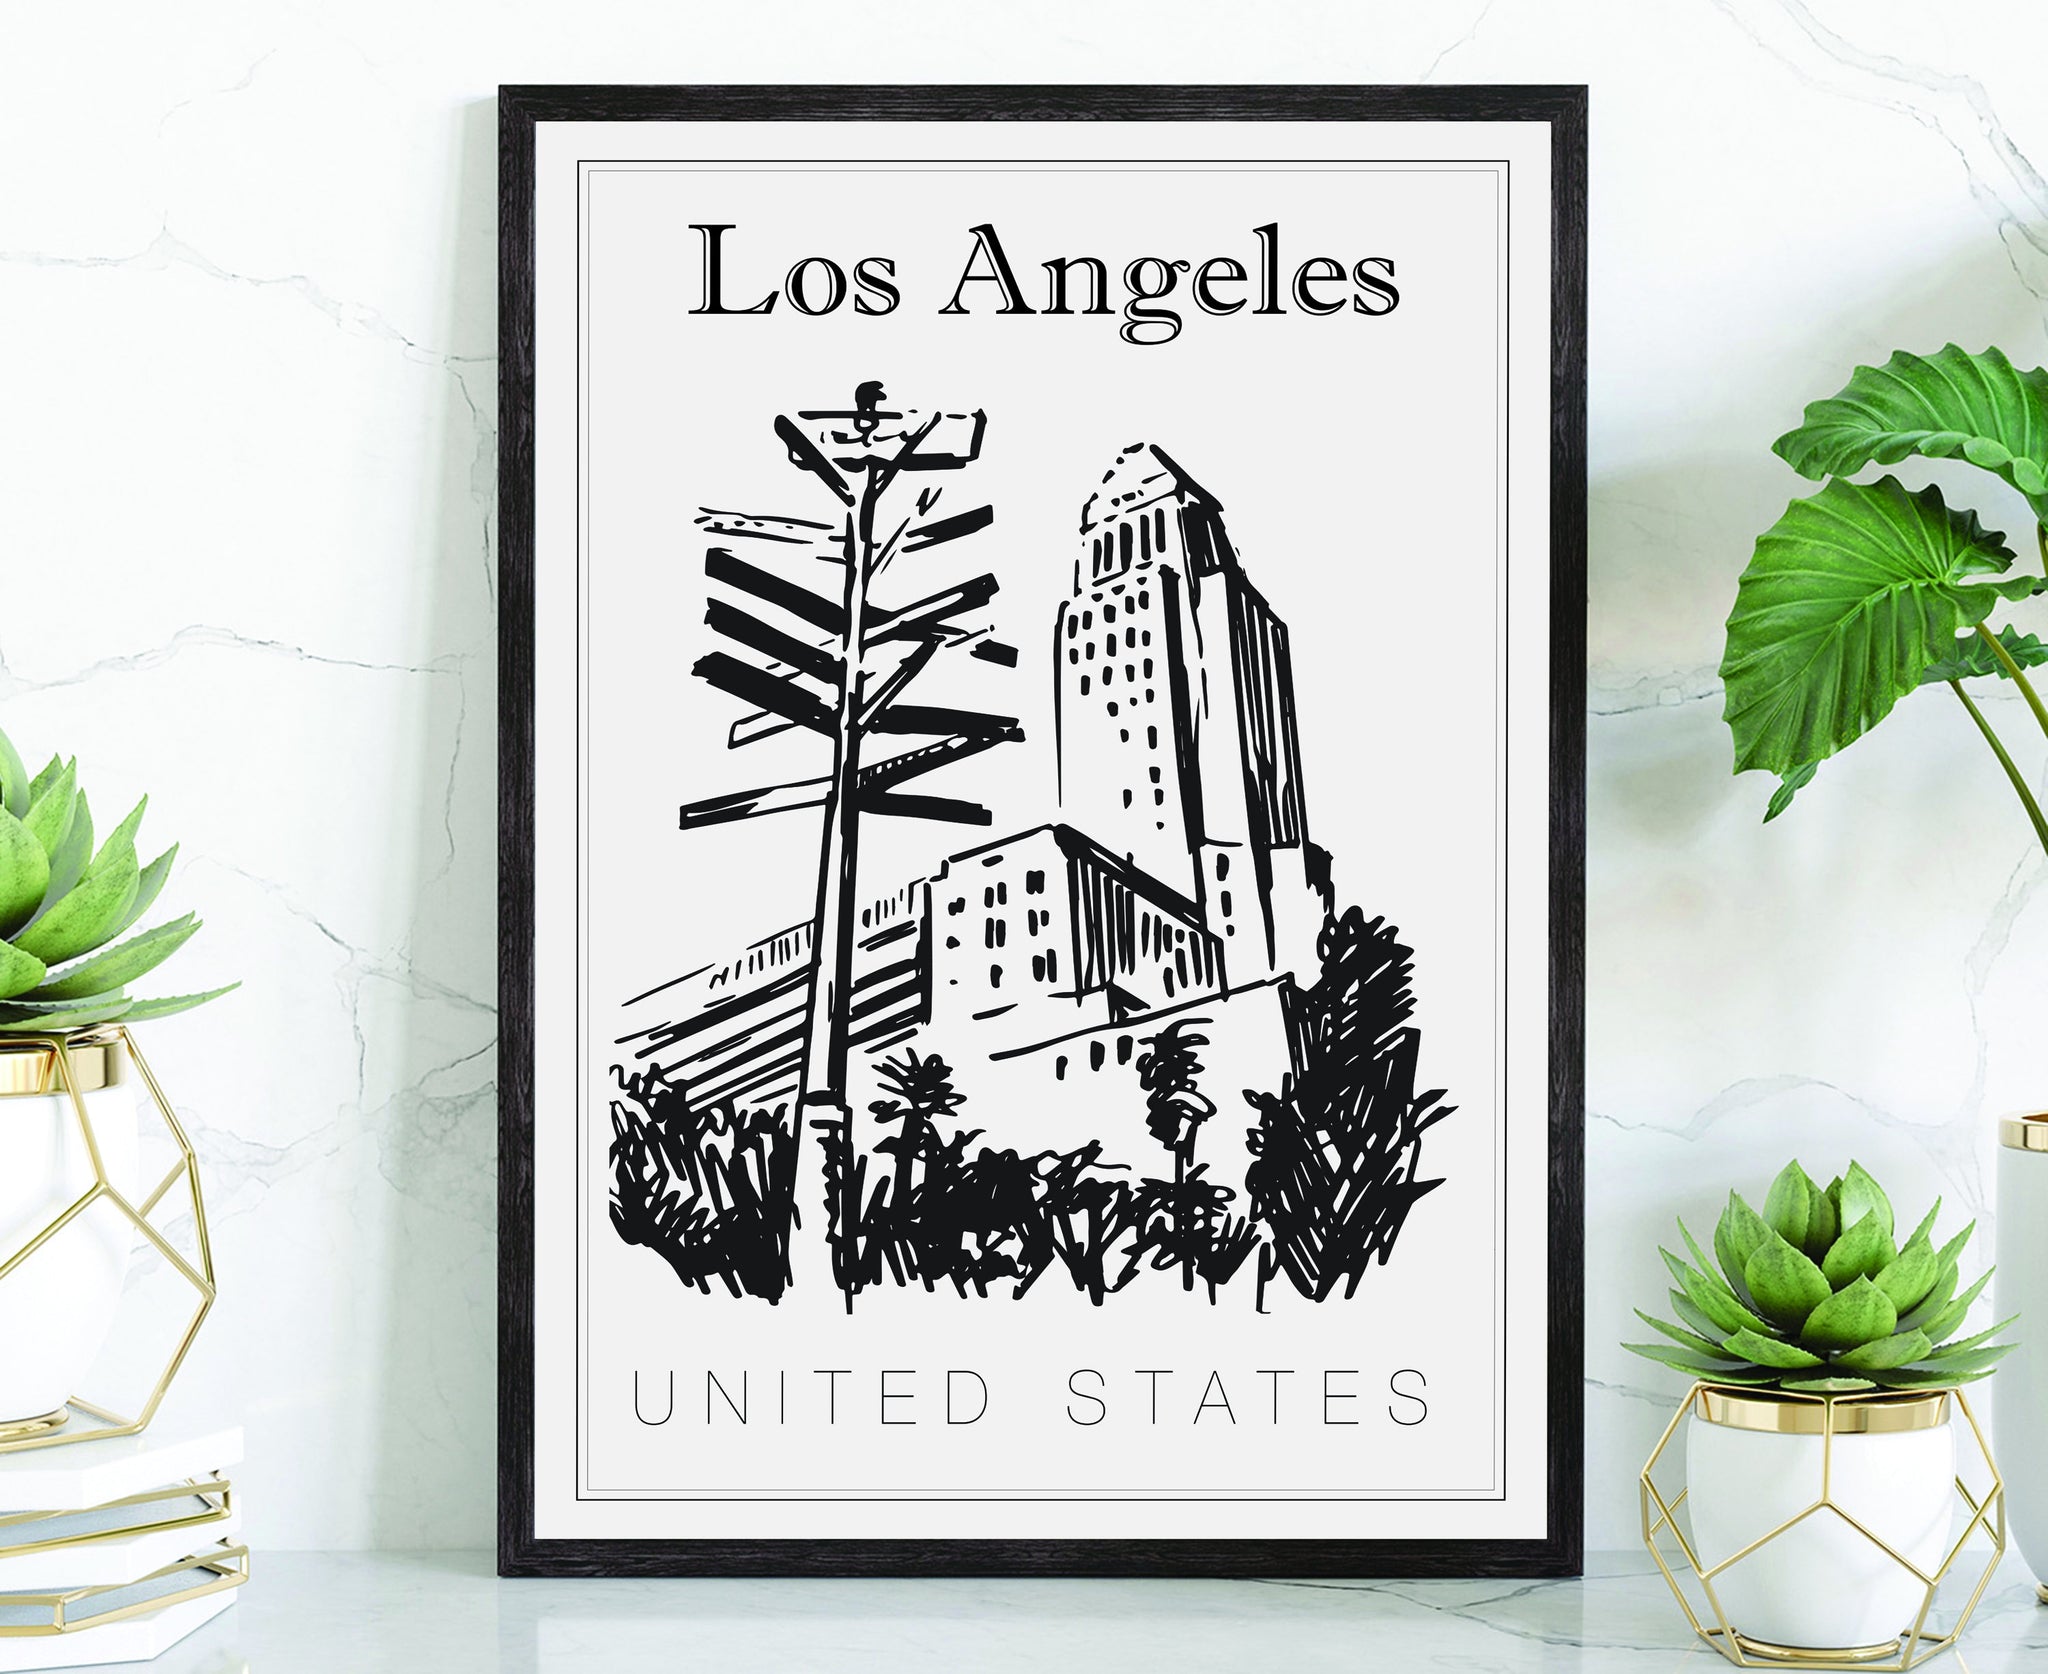 Hand Drawn Poster, Los Angeles Travel Poster, United States Poster Wall Art, Los Angeles Cityscape and Landmark Map, State Poster For Home